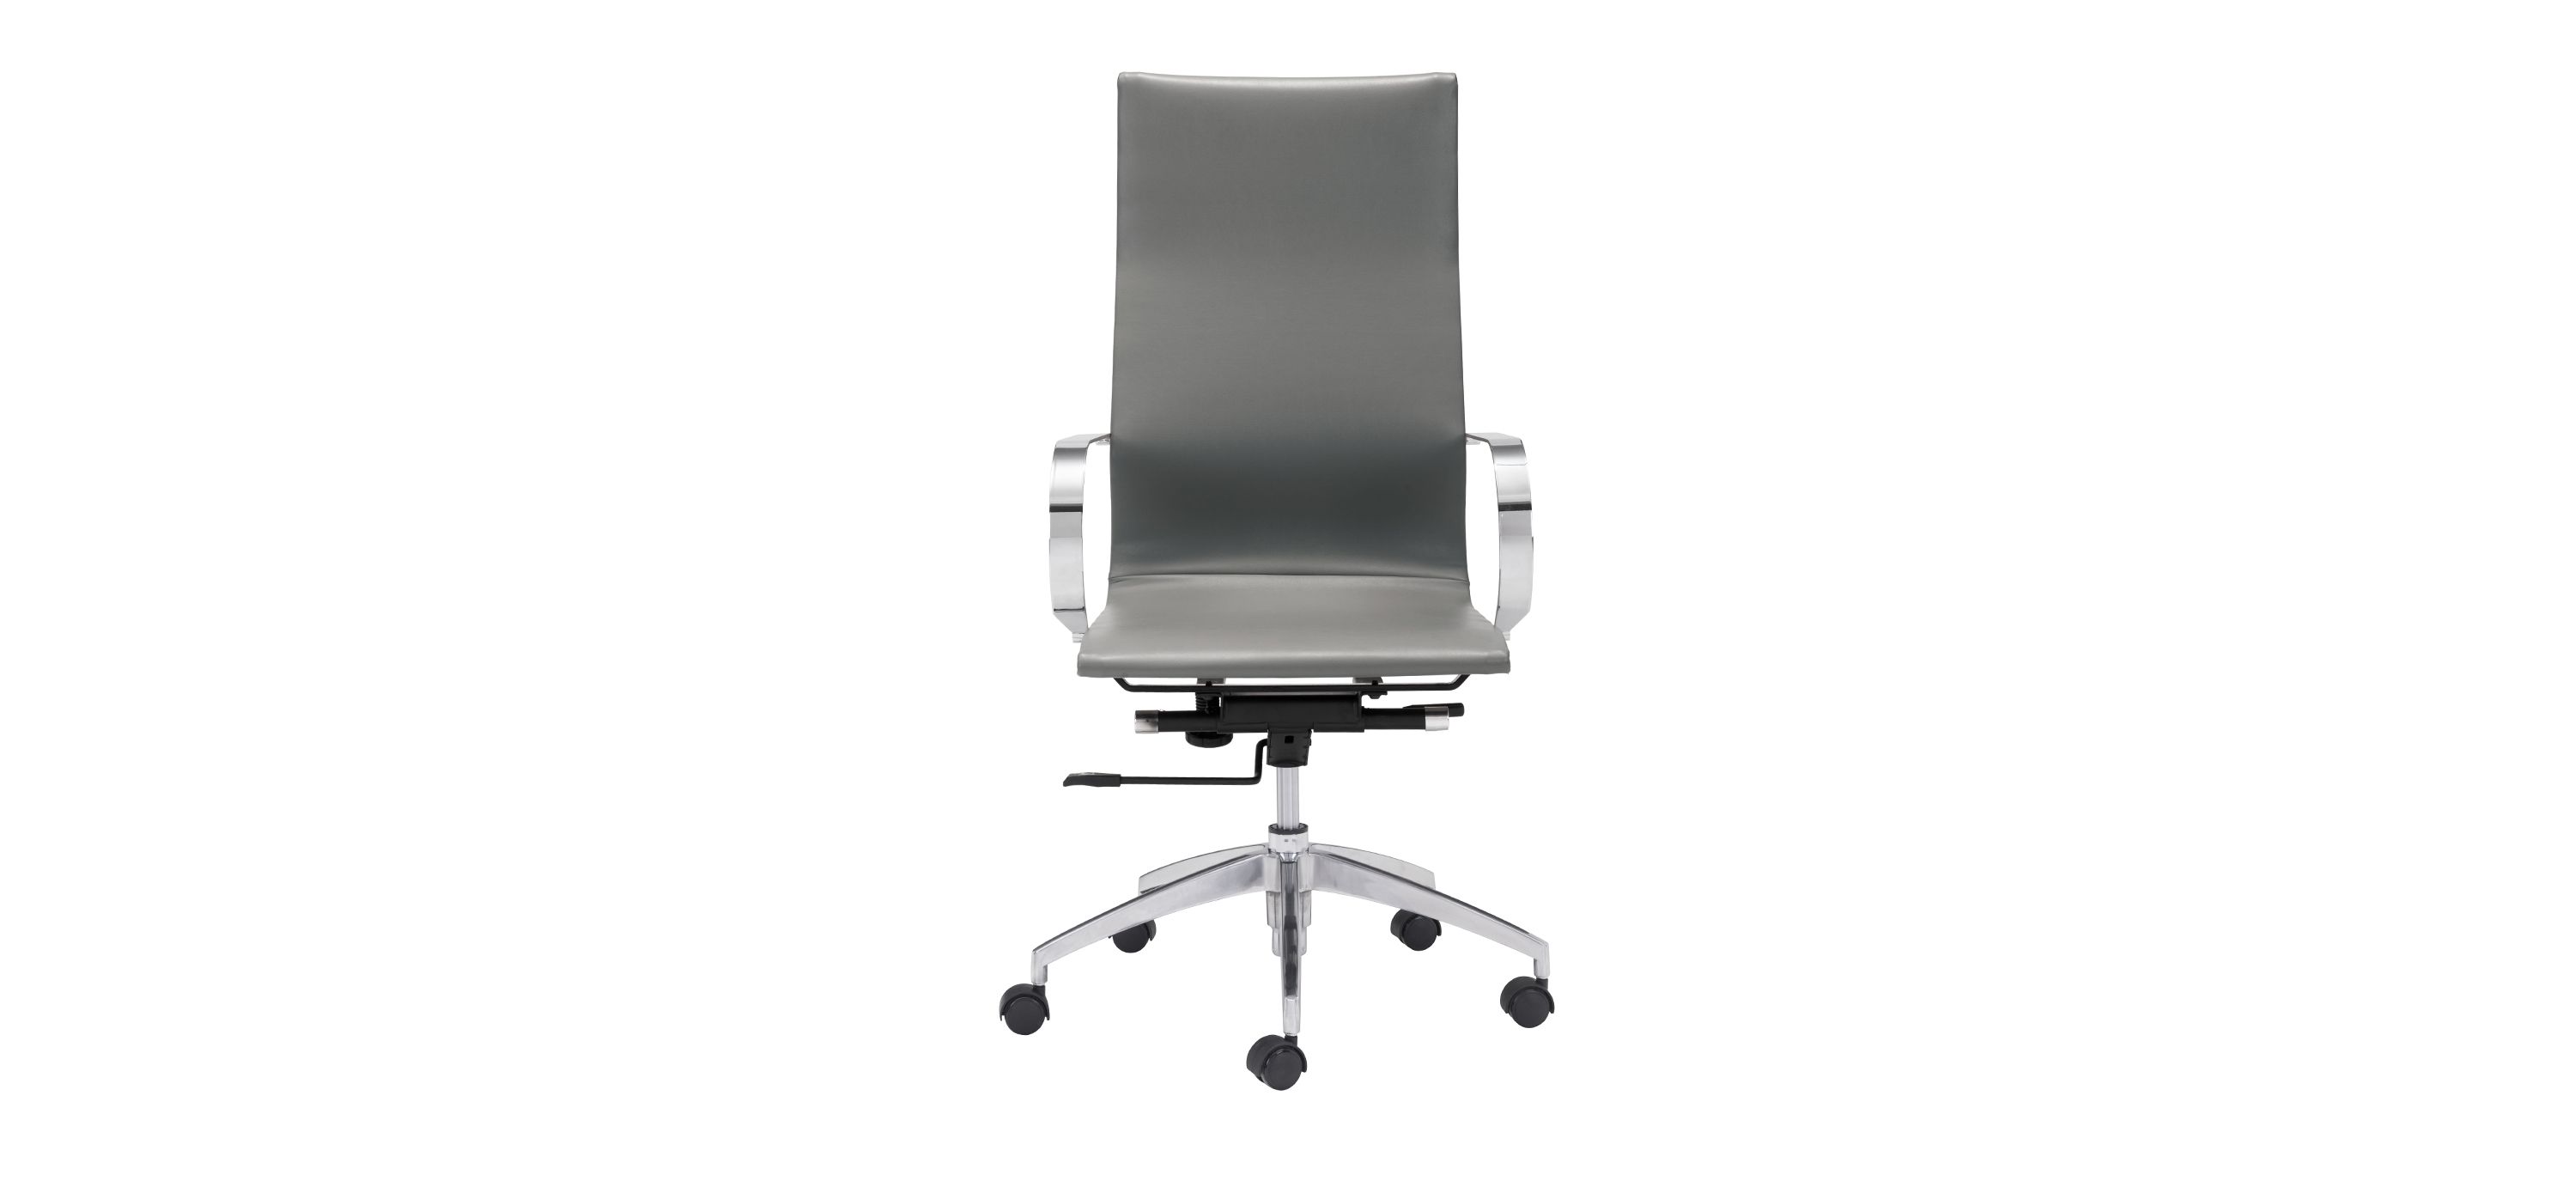 Glider High Back Office Chair